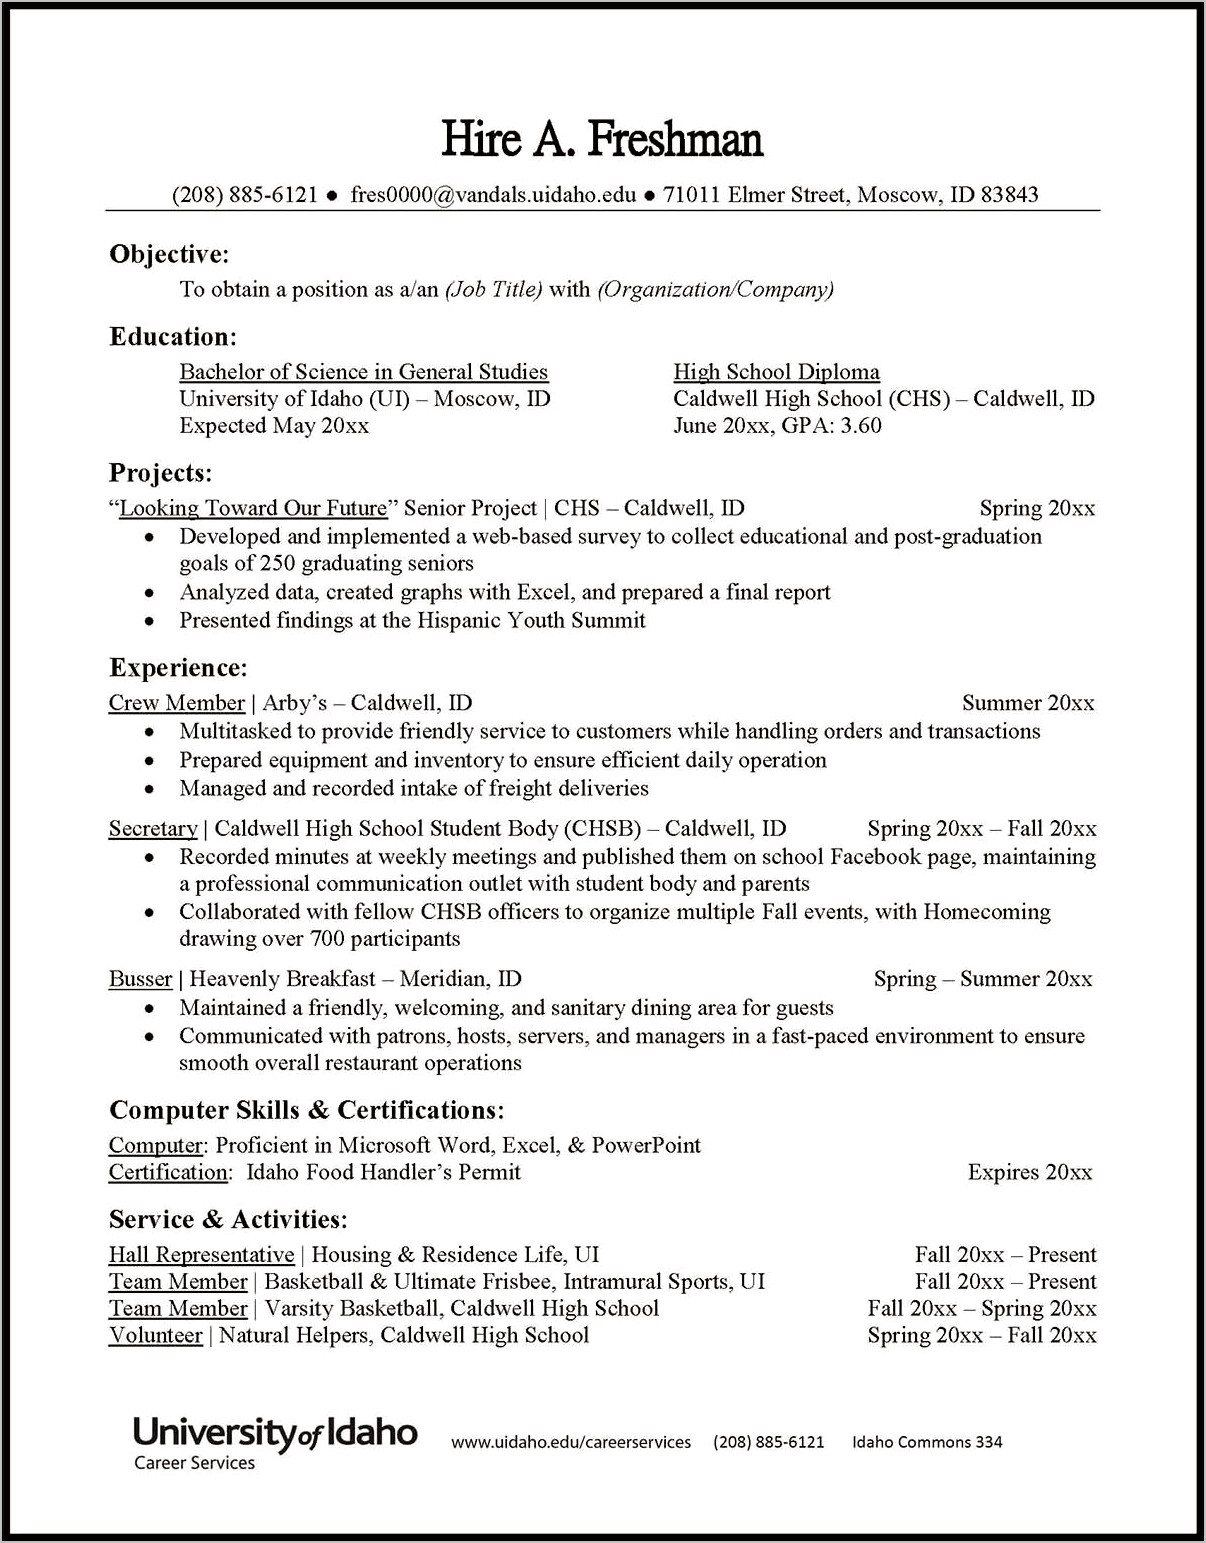 Objective Part Of Resume For Business Student